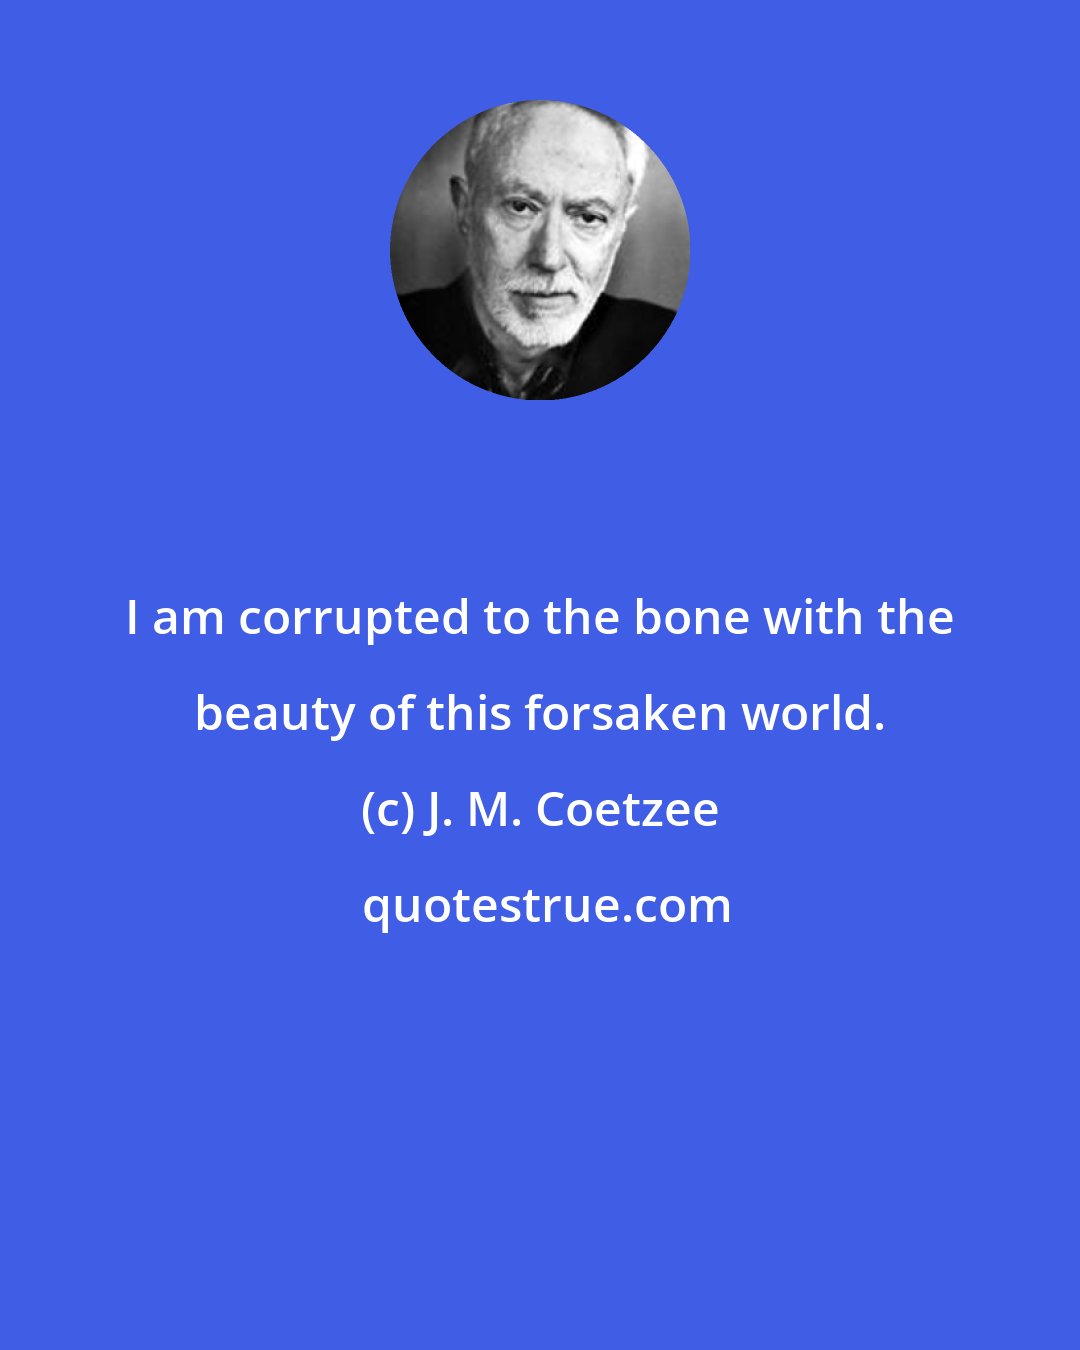 J. M. Coetzee: I am corrupted to the bone with the beauty of this forsaken world.